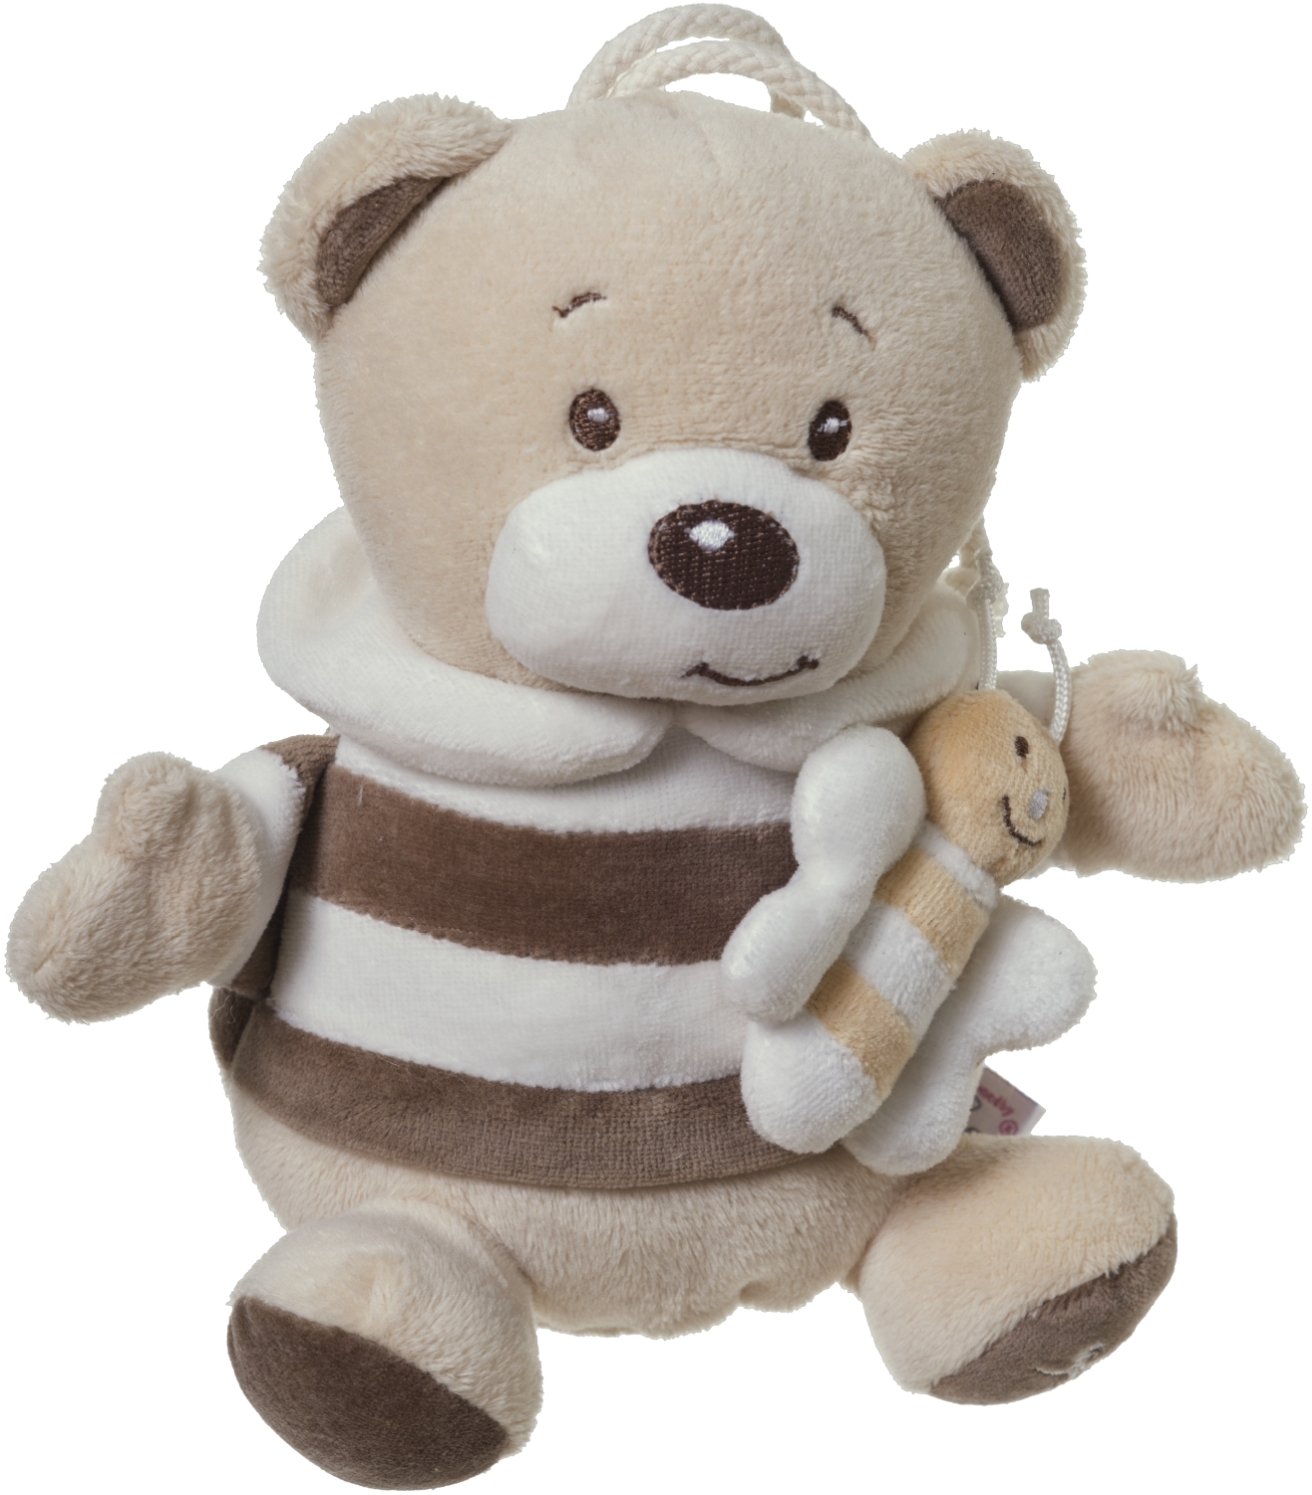 Bieco Music Box Bear Bubu, 20 cm | Baby Music Box | Sleep Aid Babies | Baby Music | Music Box Baby | Baby Sleep | Cuddly Toys for Babies | Sleep Aid Children | Baby Toy from 0 Months